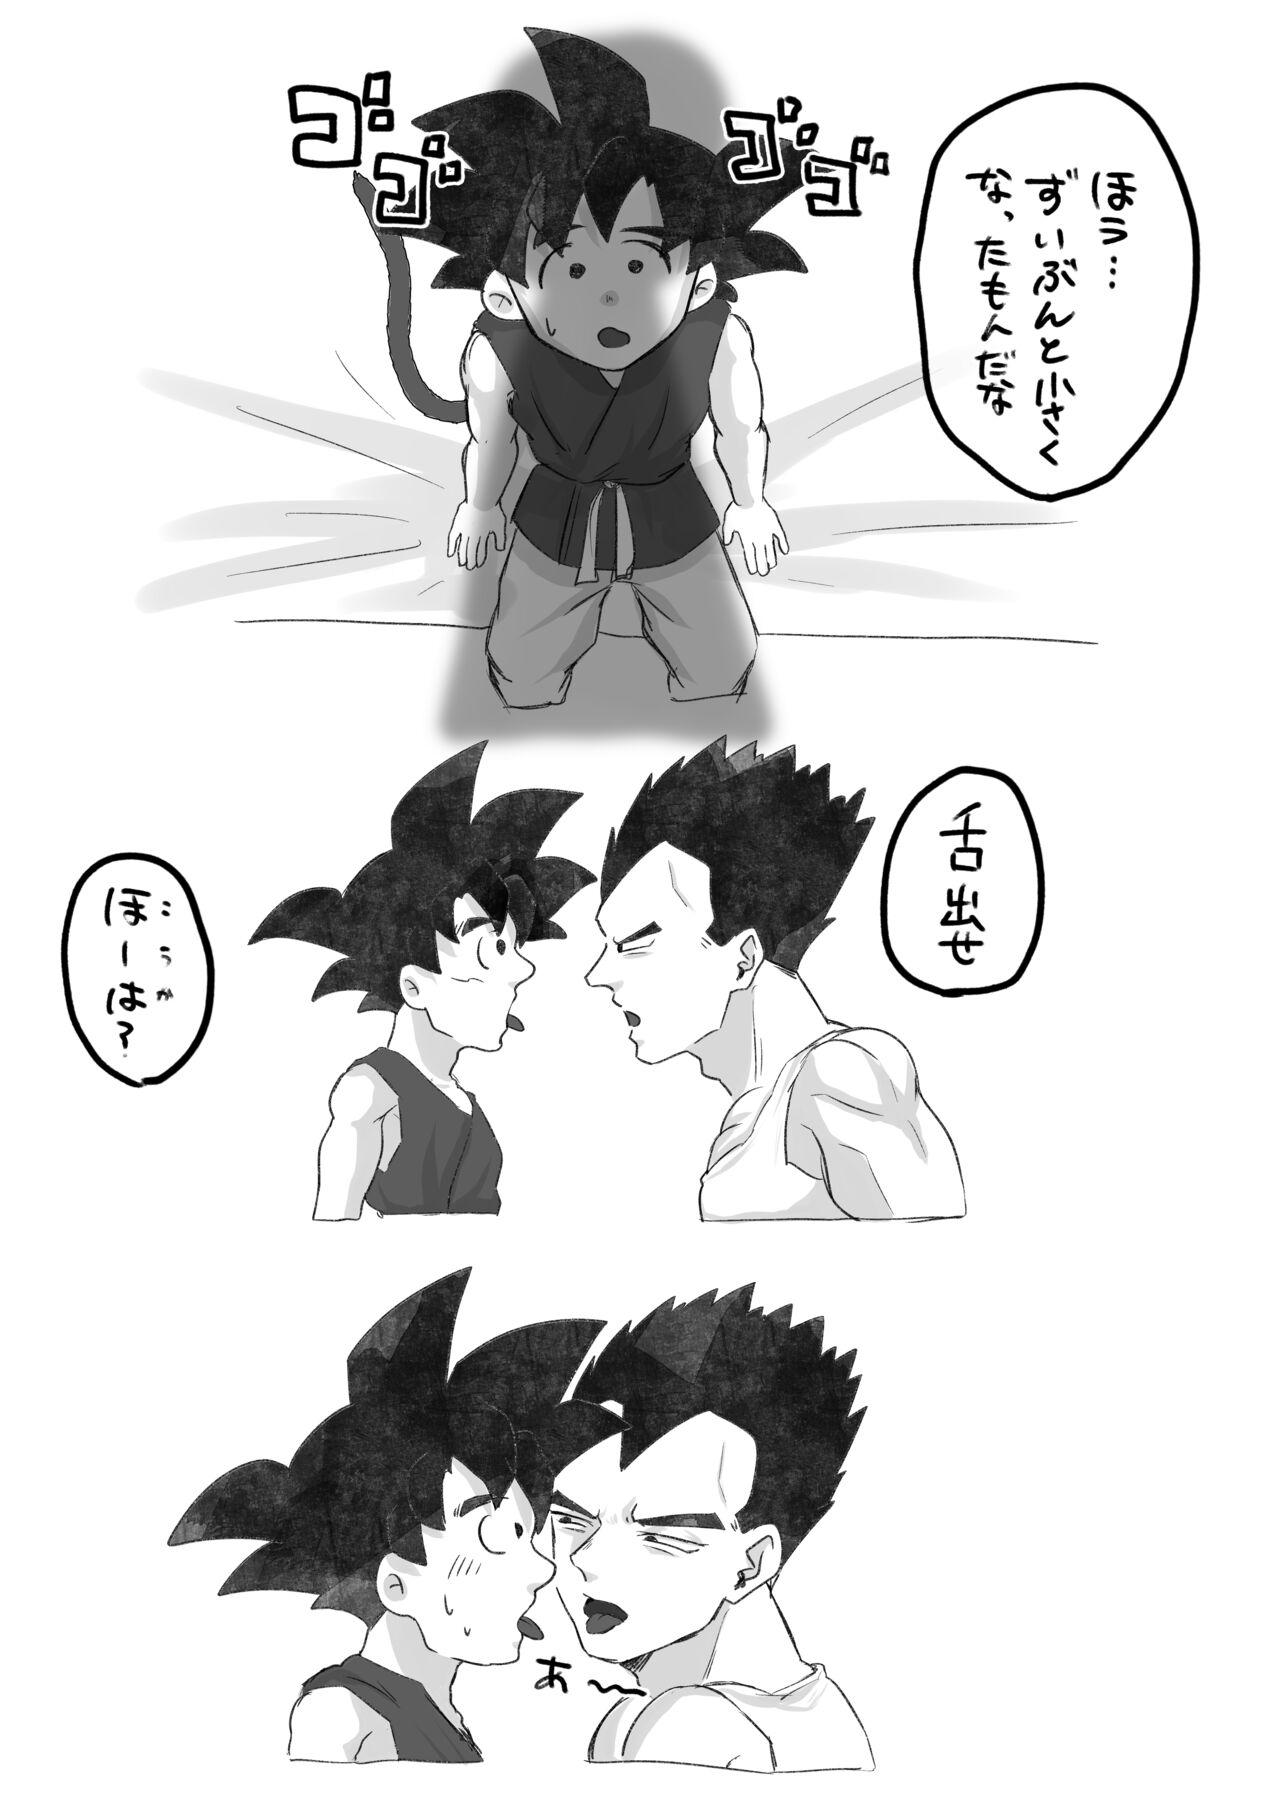 Relax GT no Dosukebe na KakaVege - Dragon ball gt Gay Shorthair - Page 3